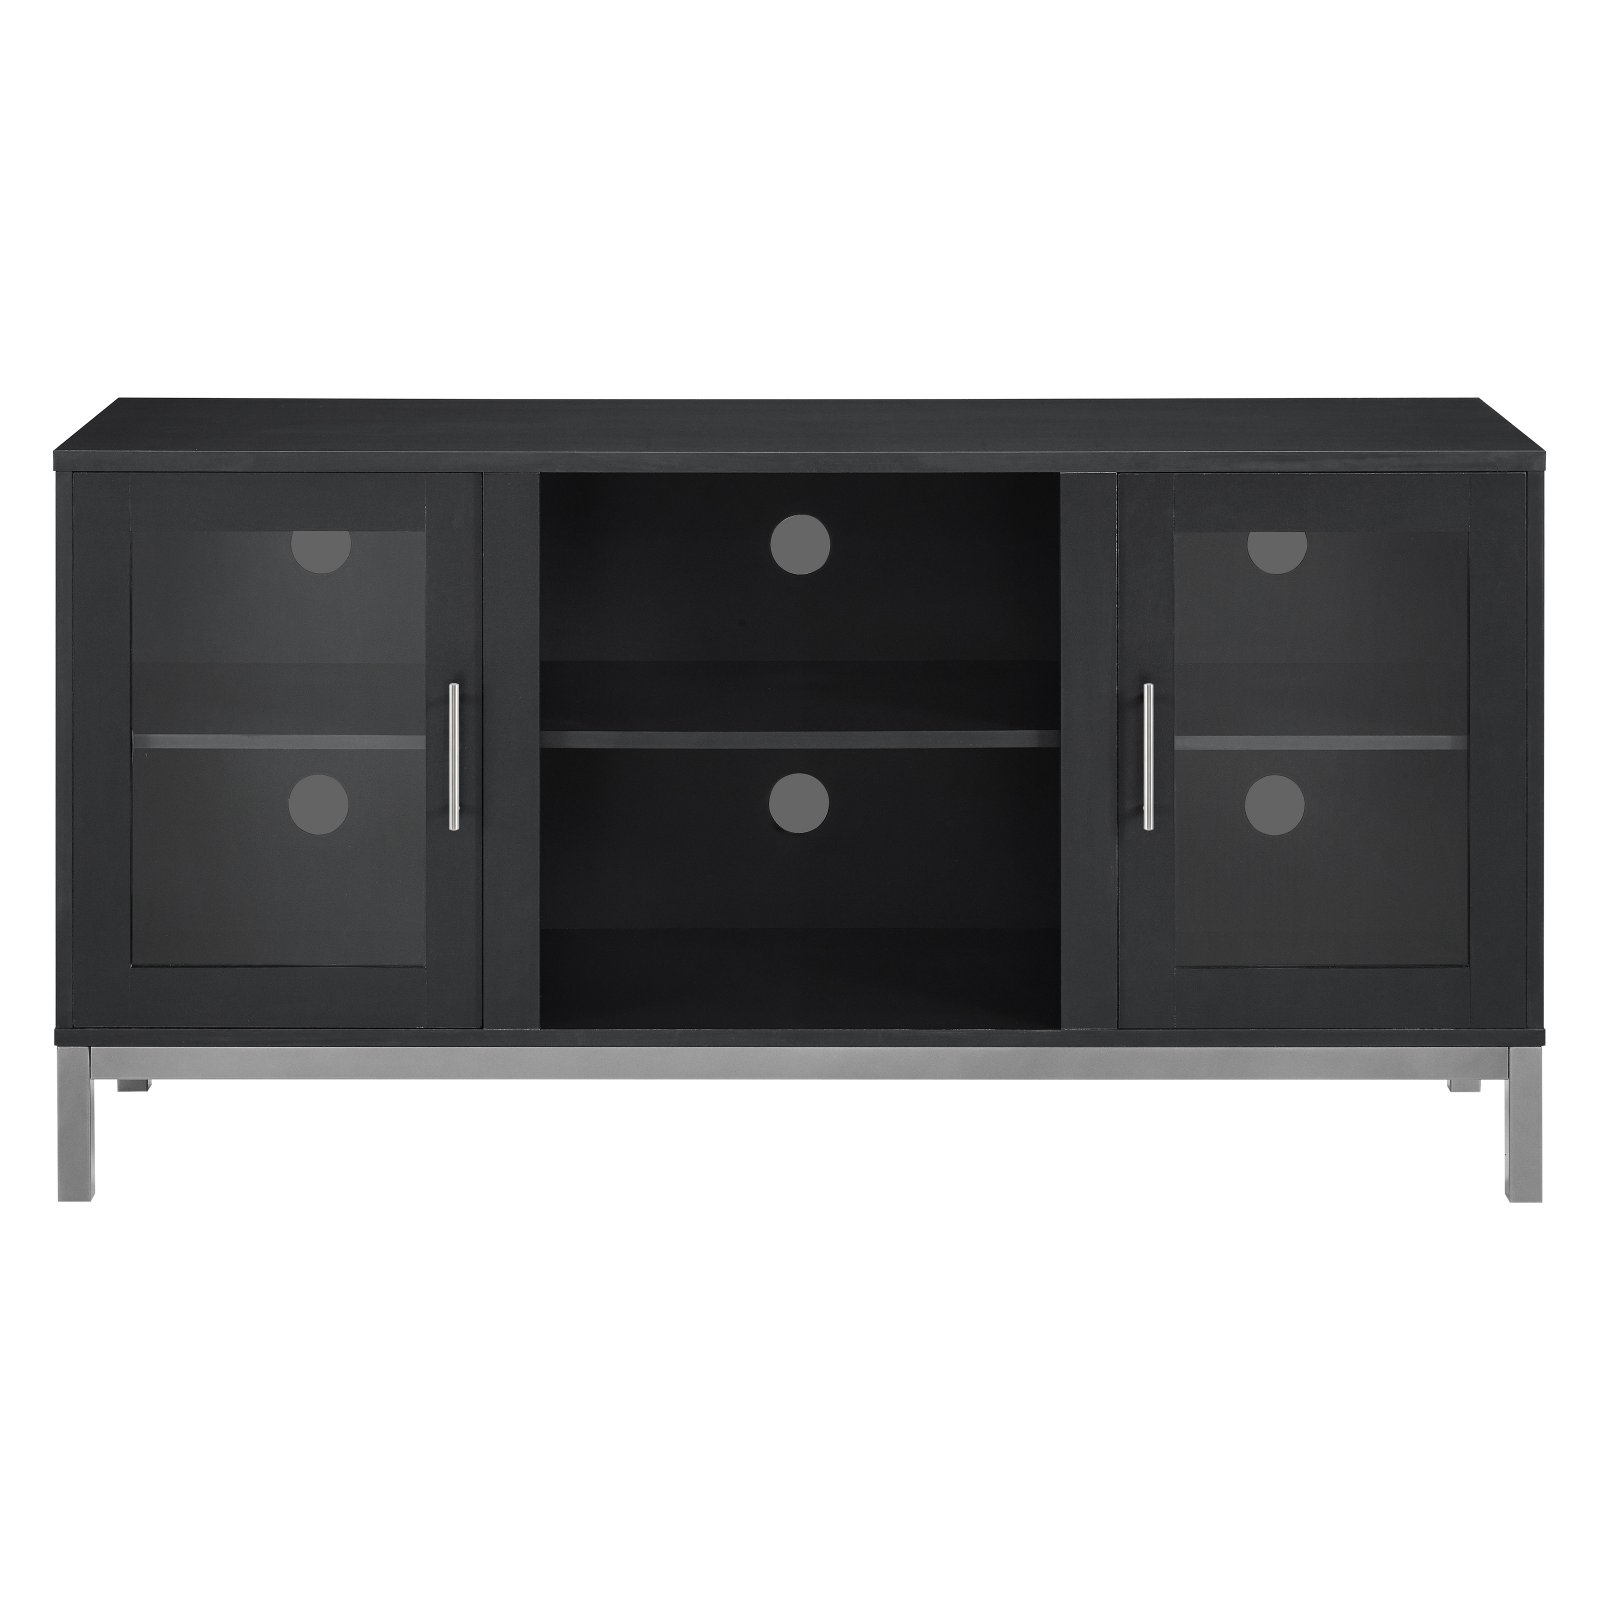 Walker Edison Avenue Wood Fireplace TV Stand - image 1 of 11